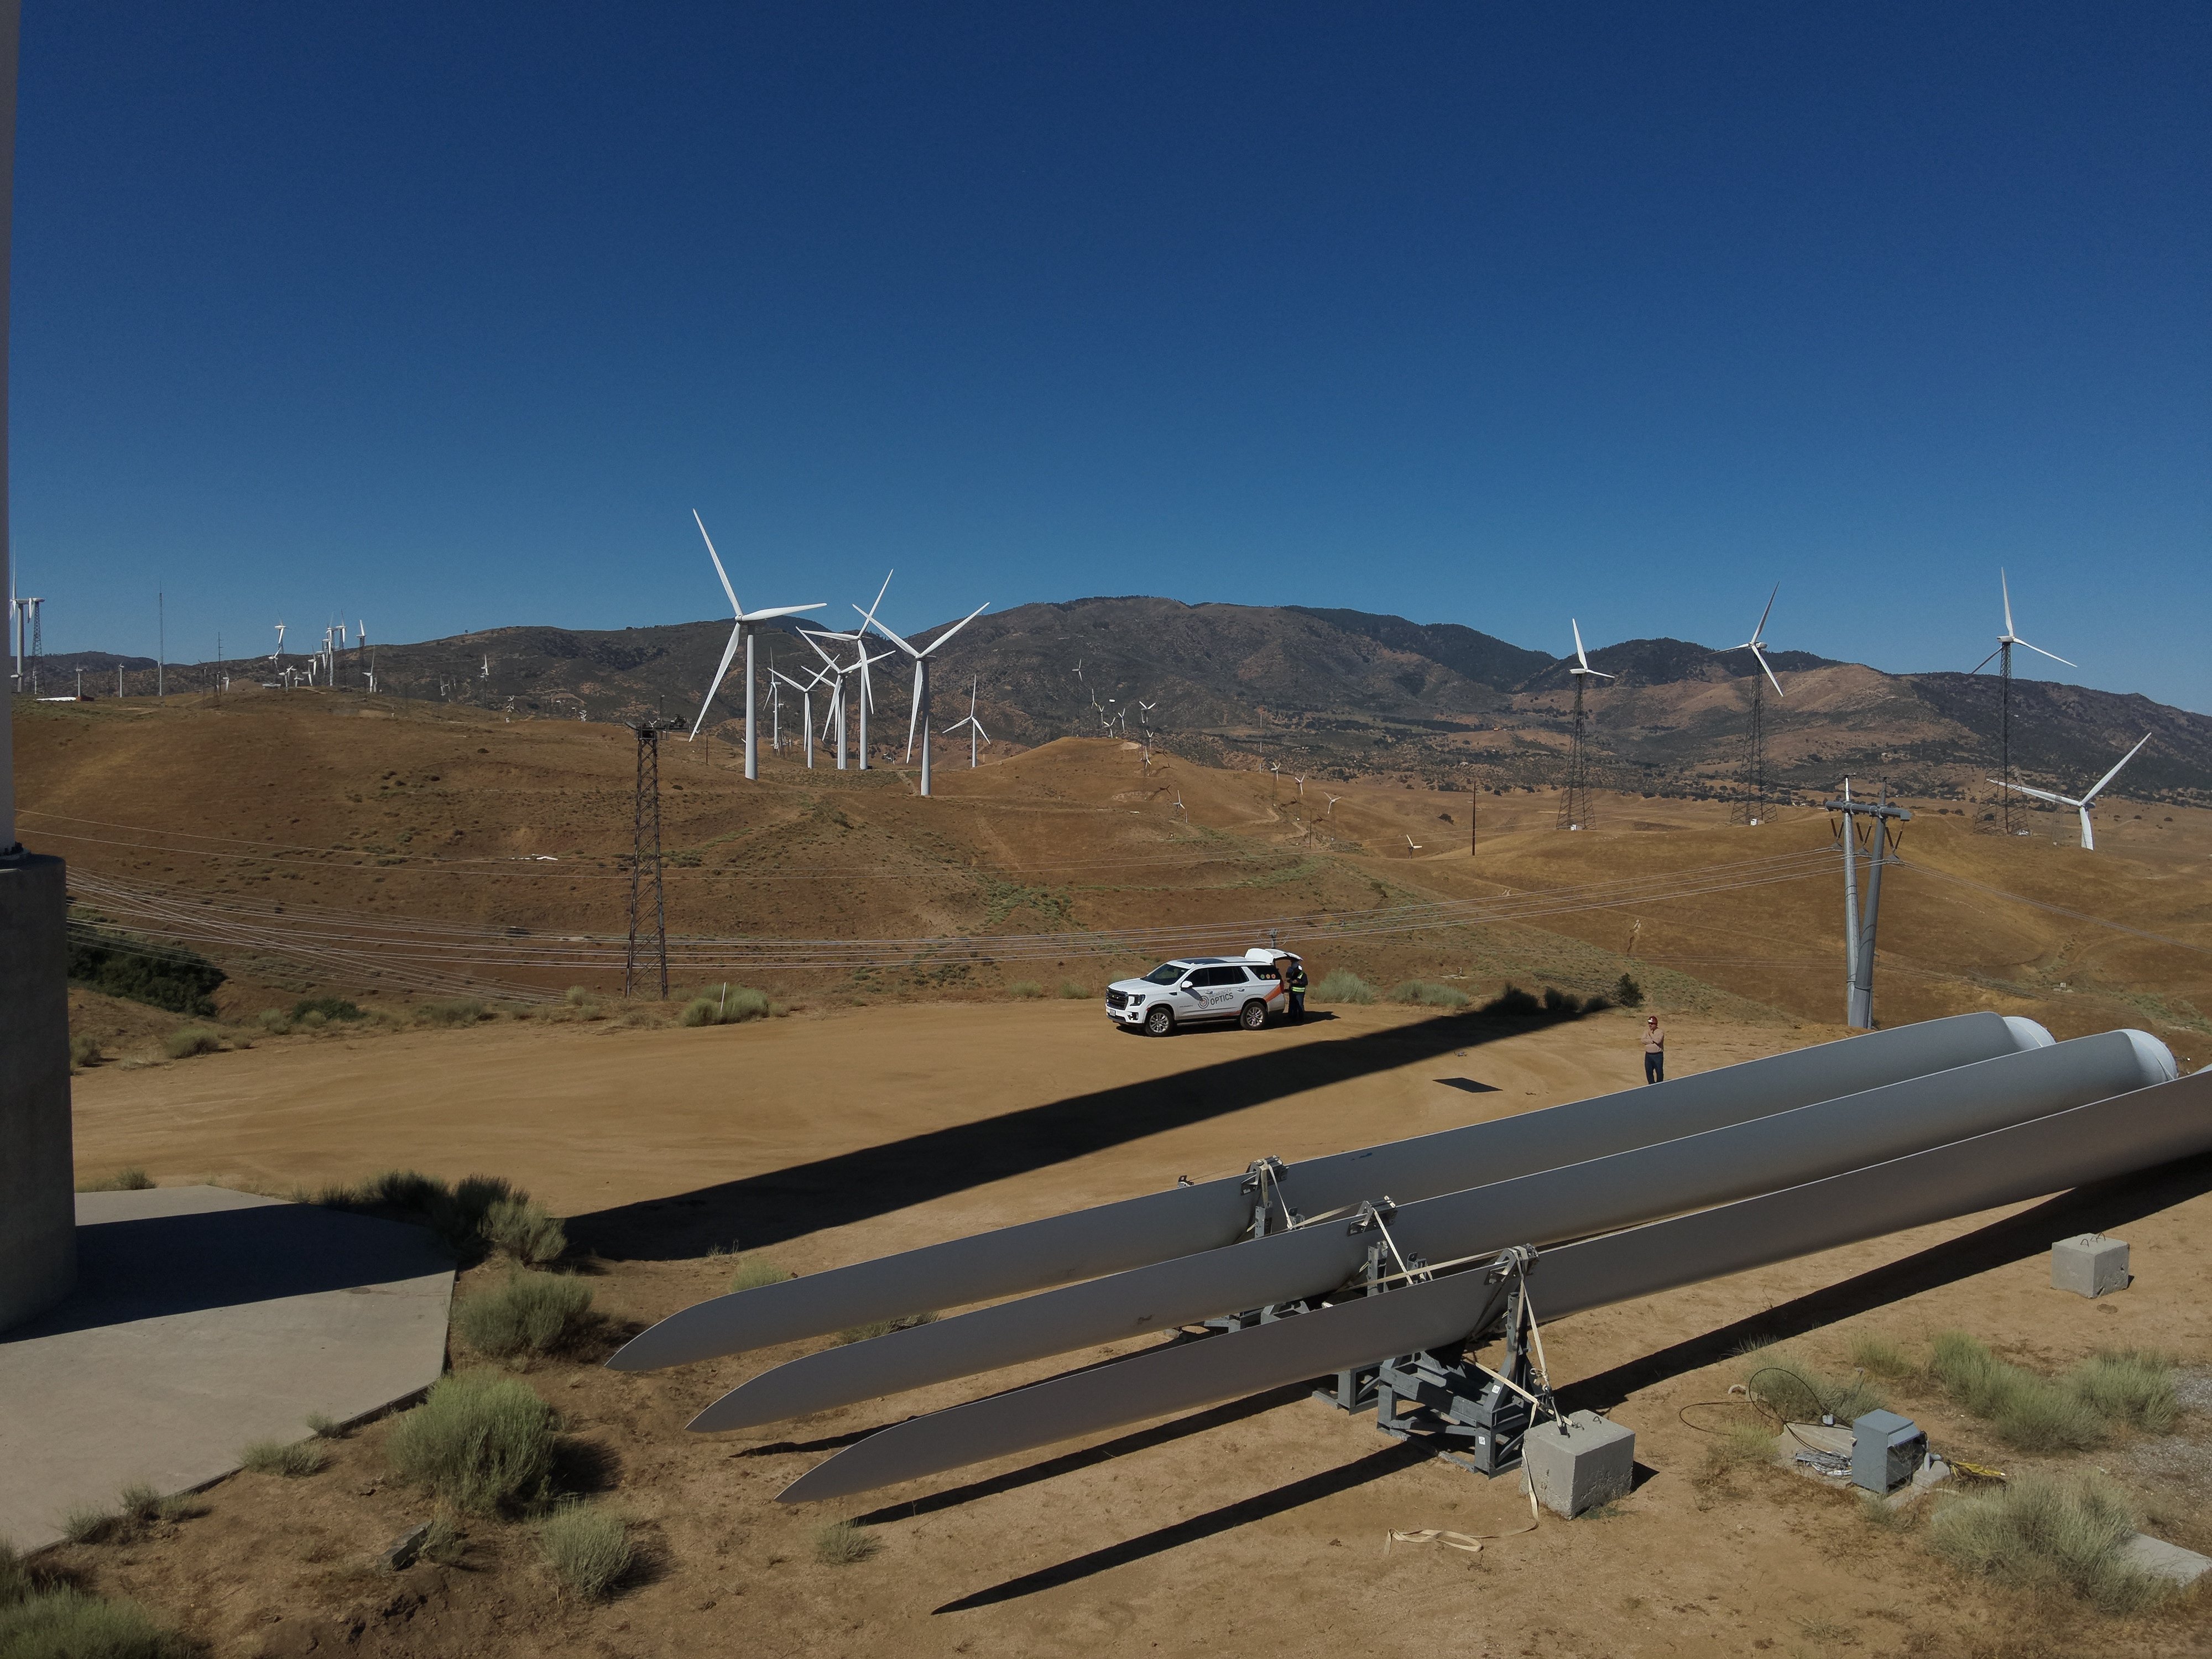 Saving over $1 million: wind turbine inspections with the Elios 3